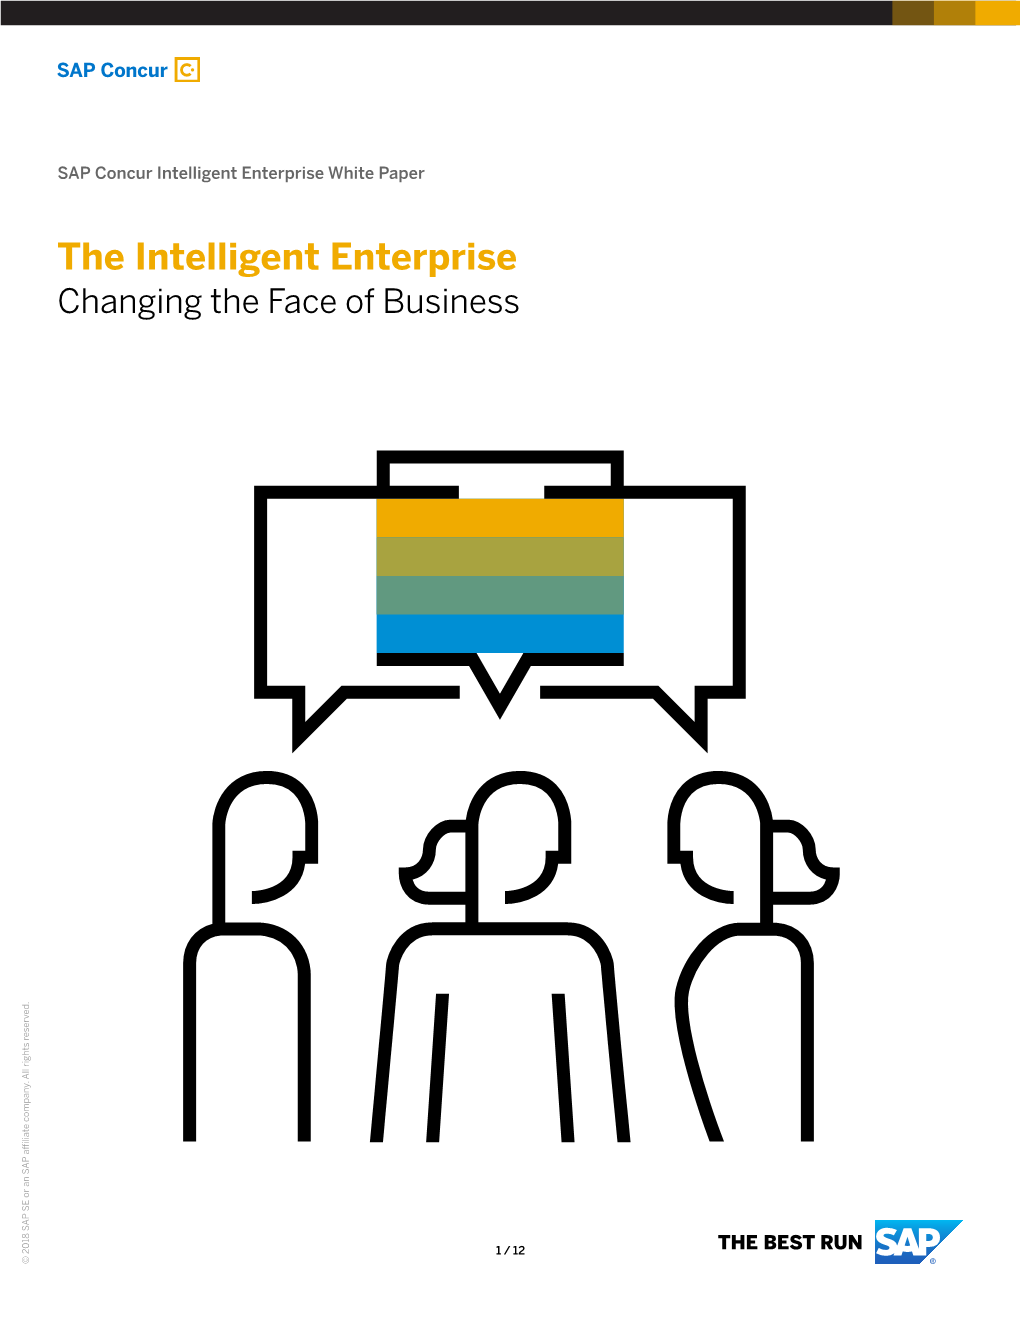 The Intelligent Enterprise Changing the Face of Business